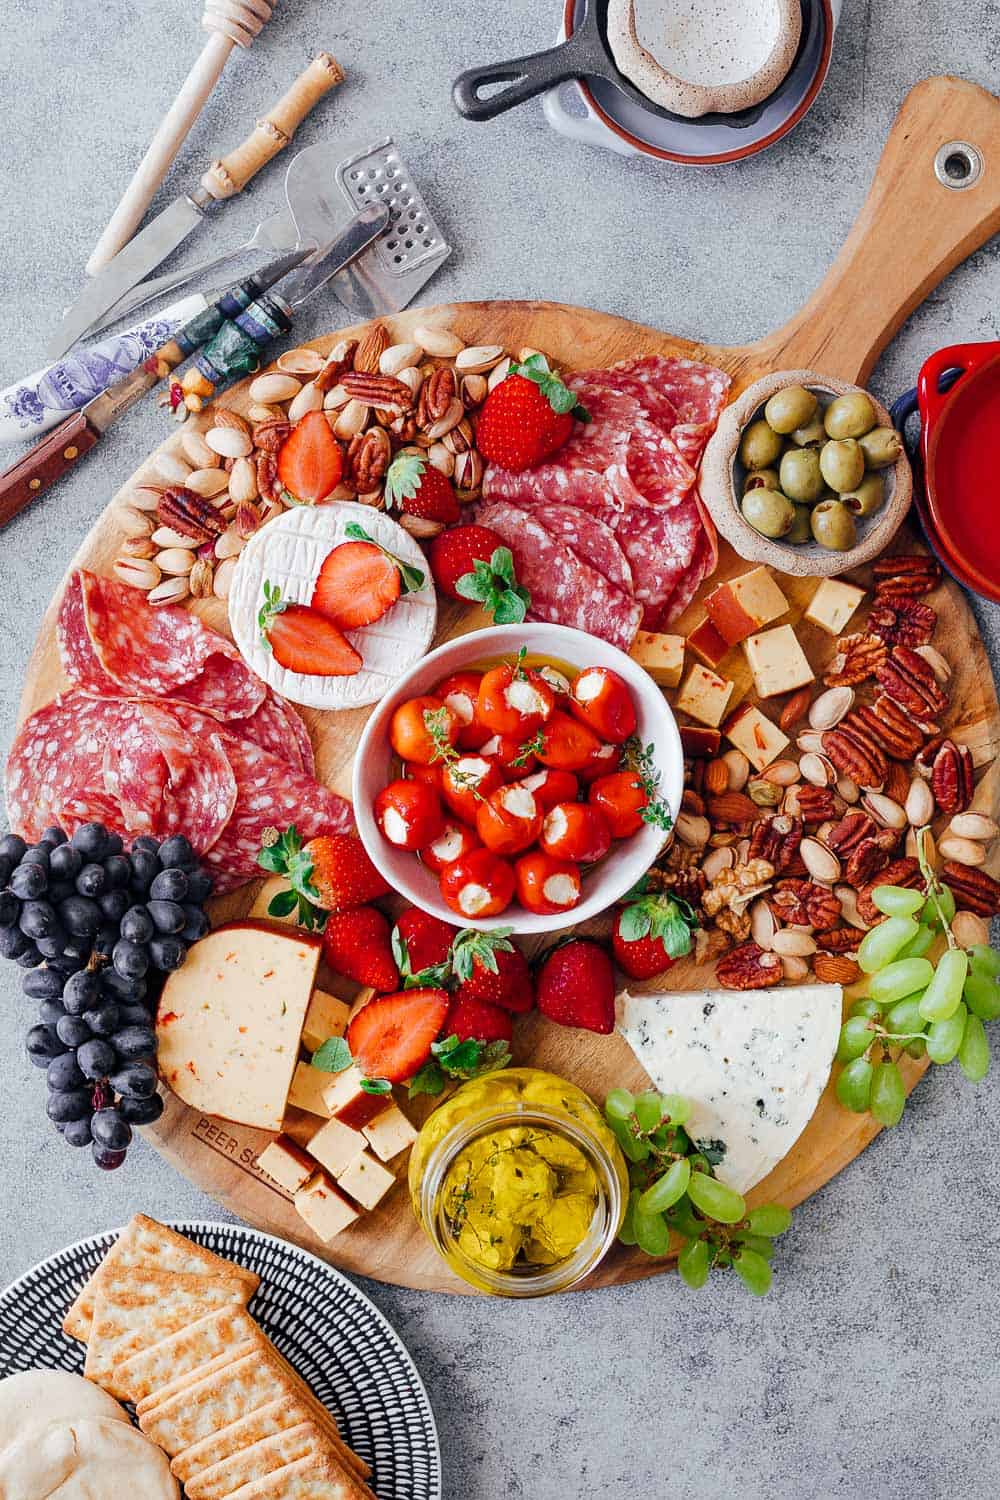 Step #5 in creating the ultimate wine and cheese board is to add local, seasonal fruits to the board. This helps keep the cost down as seasonal fruits are usually the cheapest